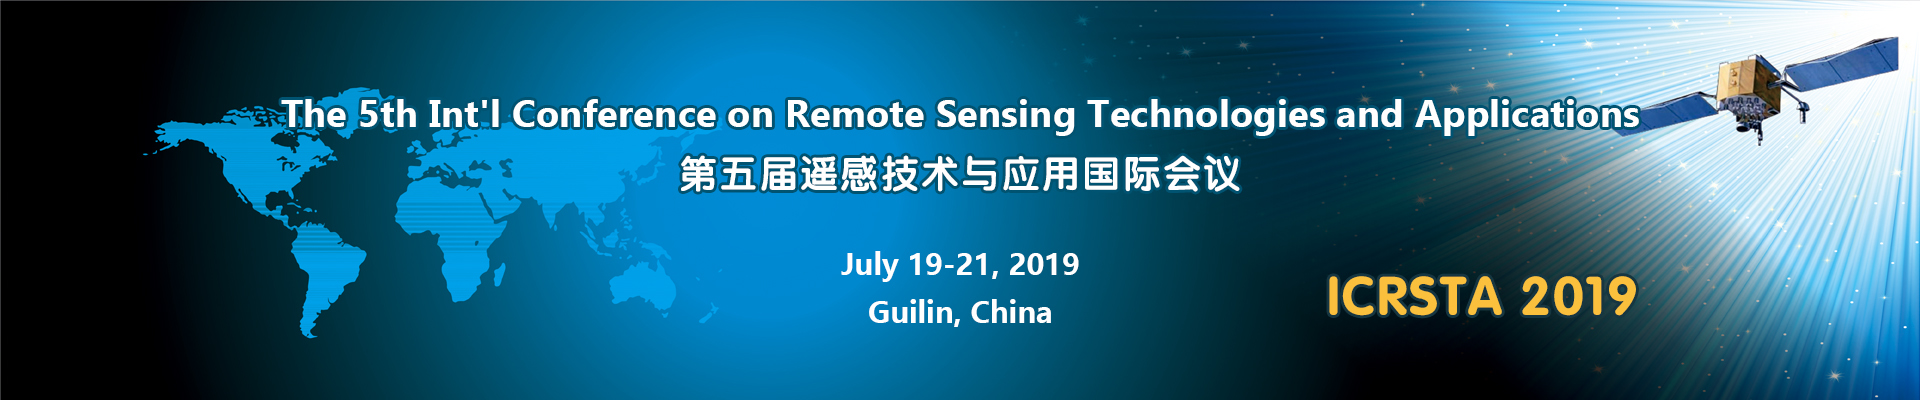 The 5th Int'l Conference on Remote Sensing Technologies and Applications (ICRSTA 2019), Guilin, Guangxi, China